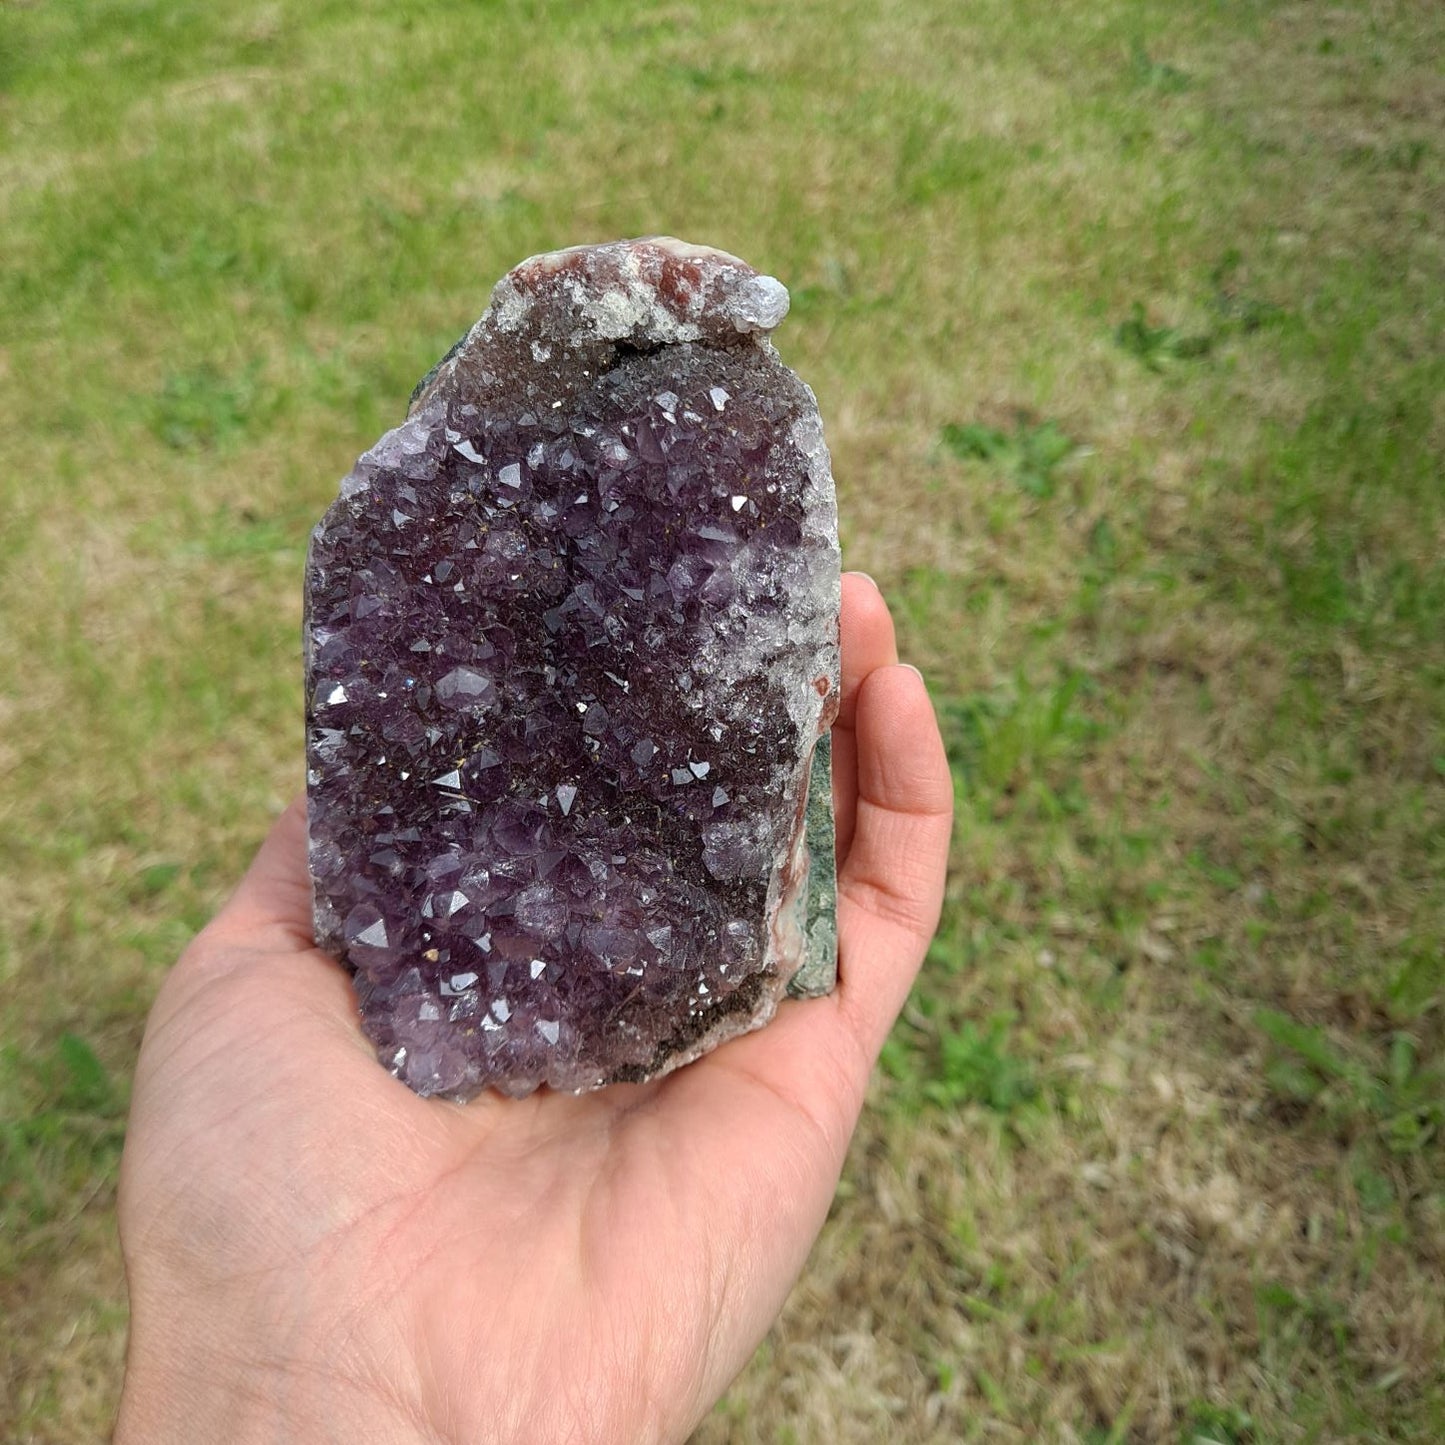 Dumi's Crystals | Amethyst Cluster (10.6cm, Striking) in hand (side view) | Feel the intricate crystals of this Amethyst Cluster (10.6 x 6.3 x 6.9cm) as you hold it in your hand. Its comfortable size allows you to connect with its calming energy, promoting relaxation and emotional balance.